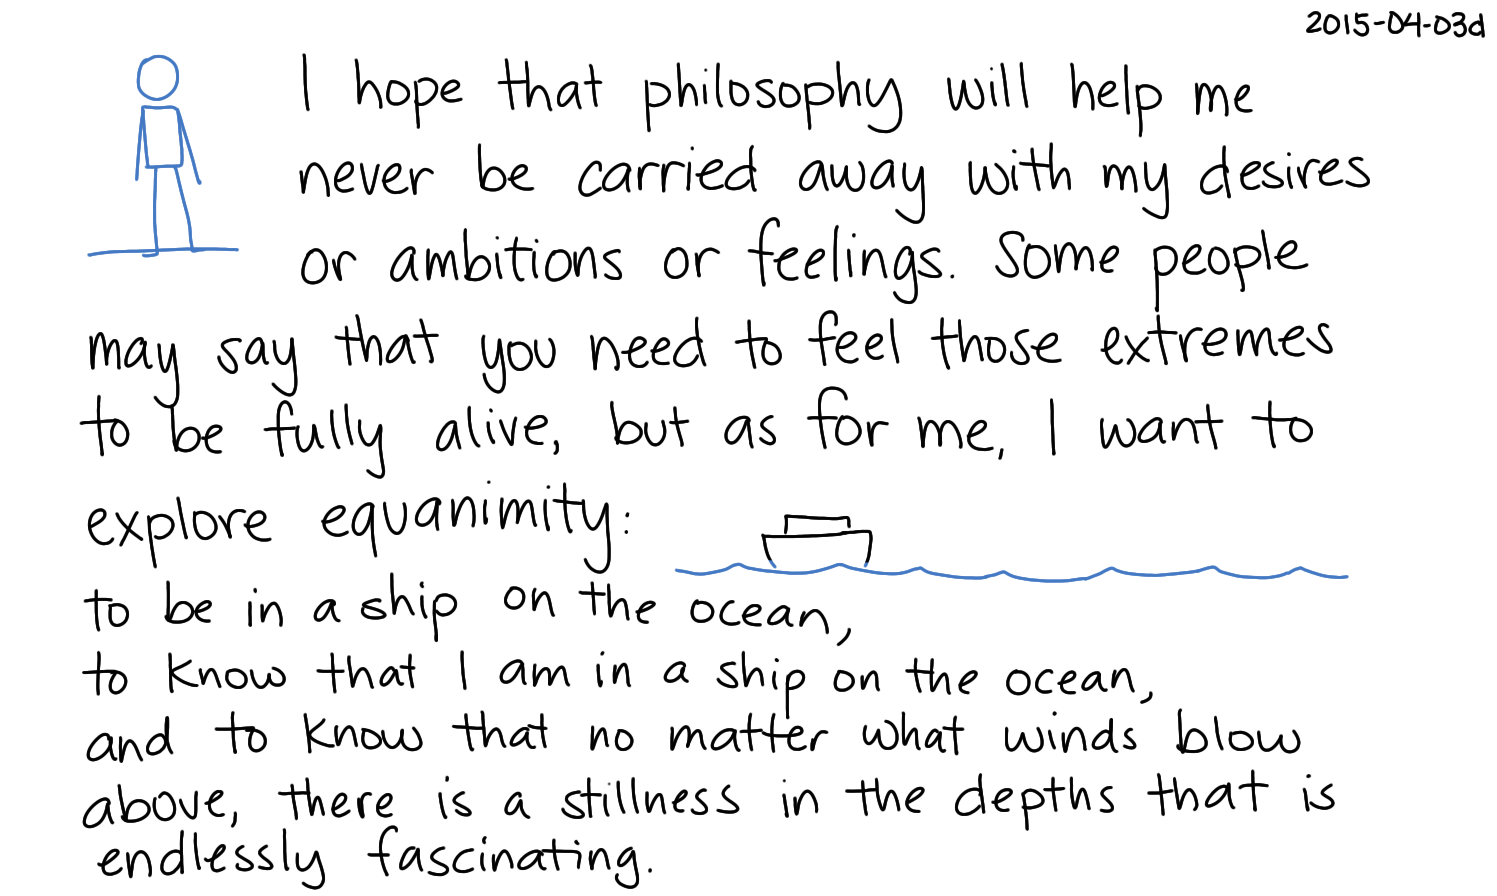 2015-04-03d Equanimity -- index card #philosophy #equanimity.png